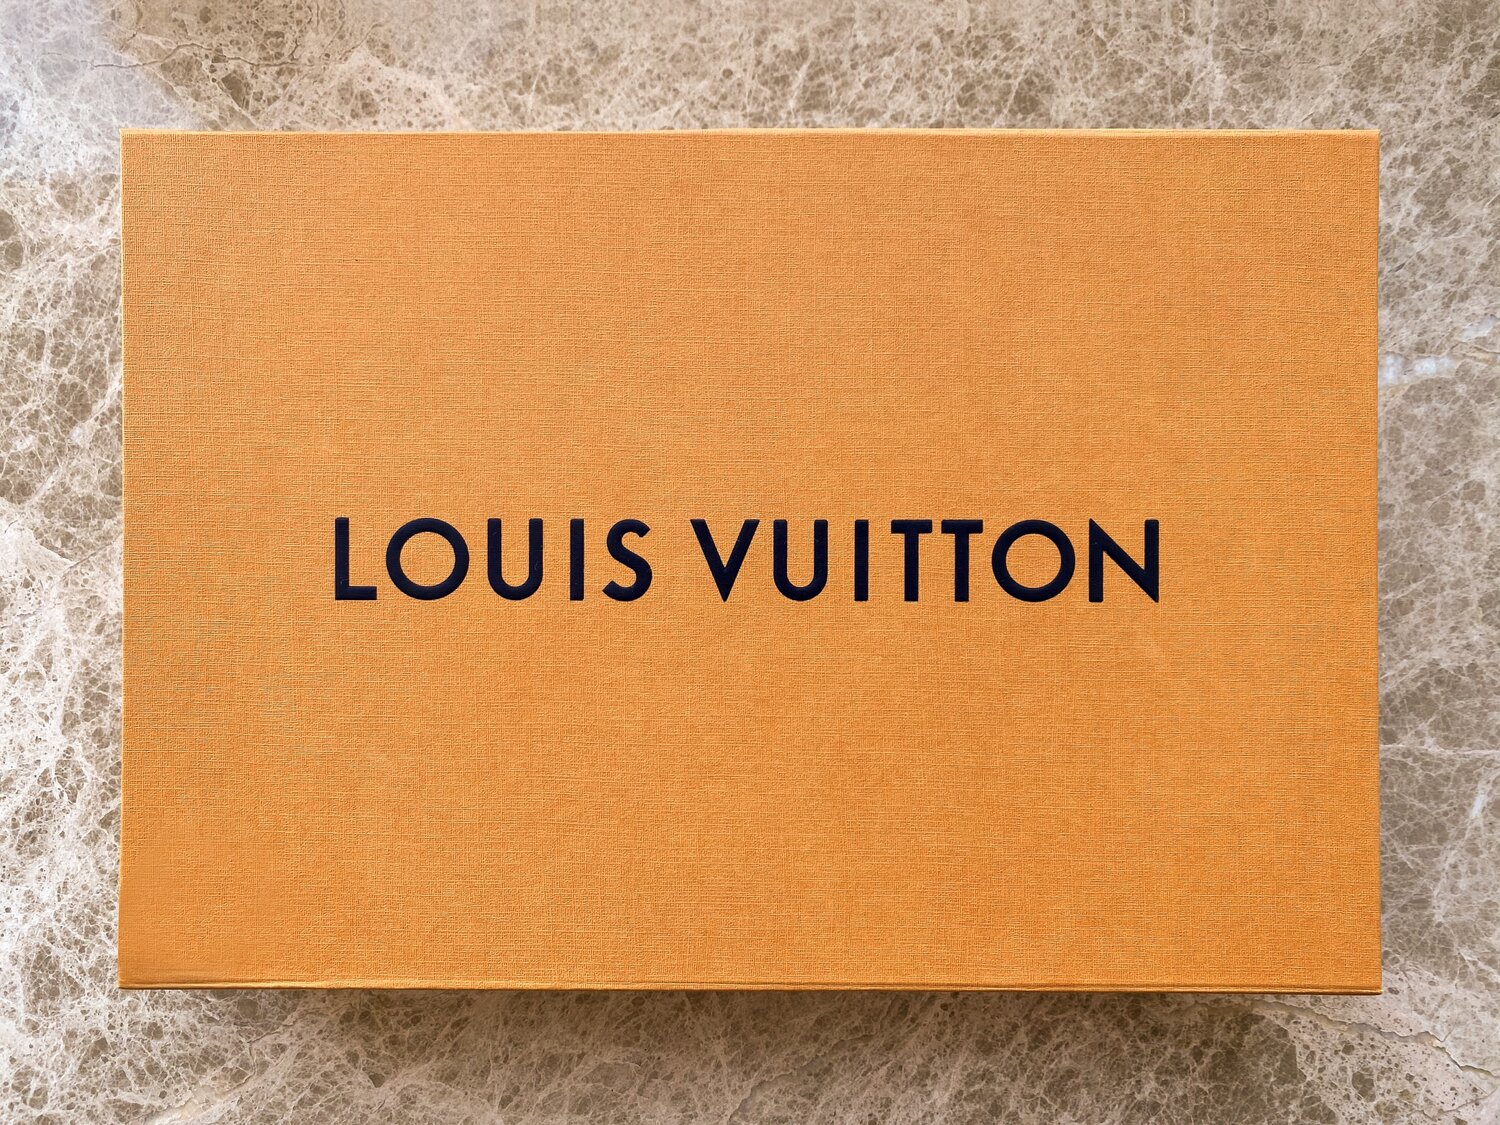 Is Louis Vuitton Publicly Traded